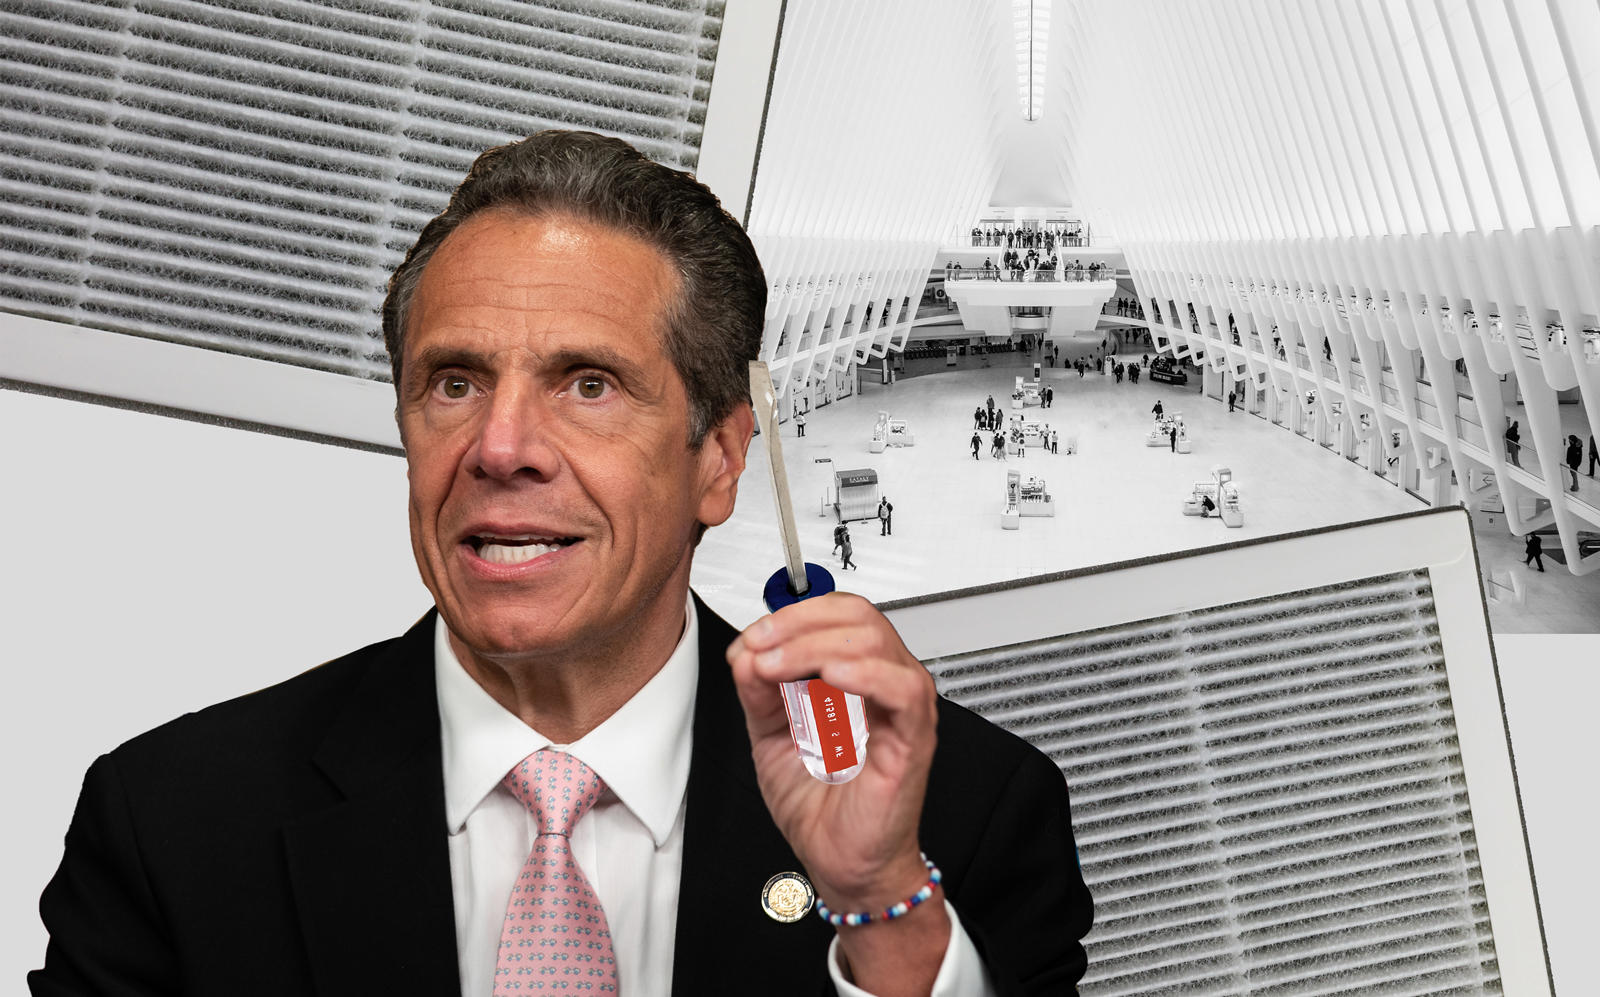 Gov. Andrew Cuomo says malls will need to make their AC systems coronavirus-proof before reopening (Getty)